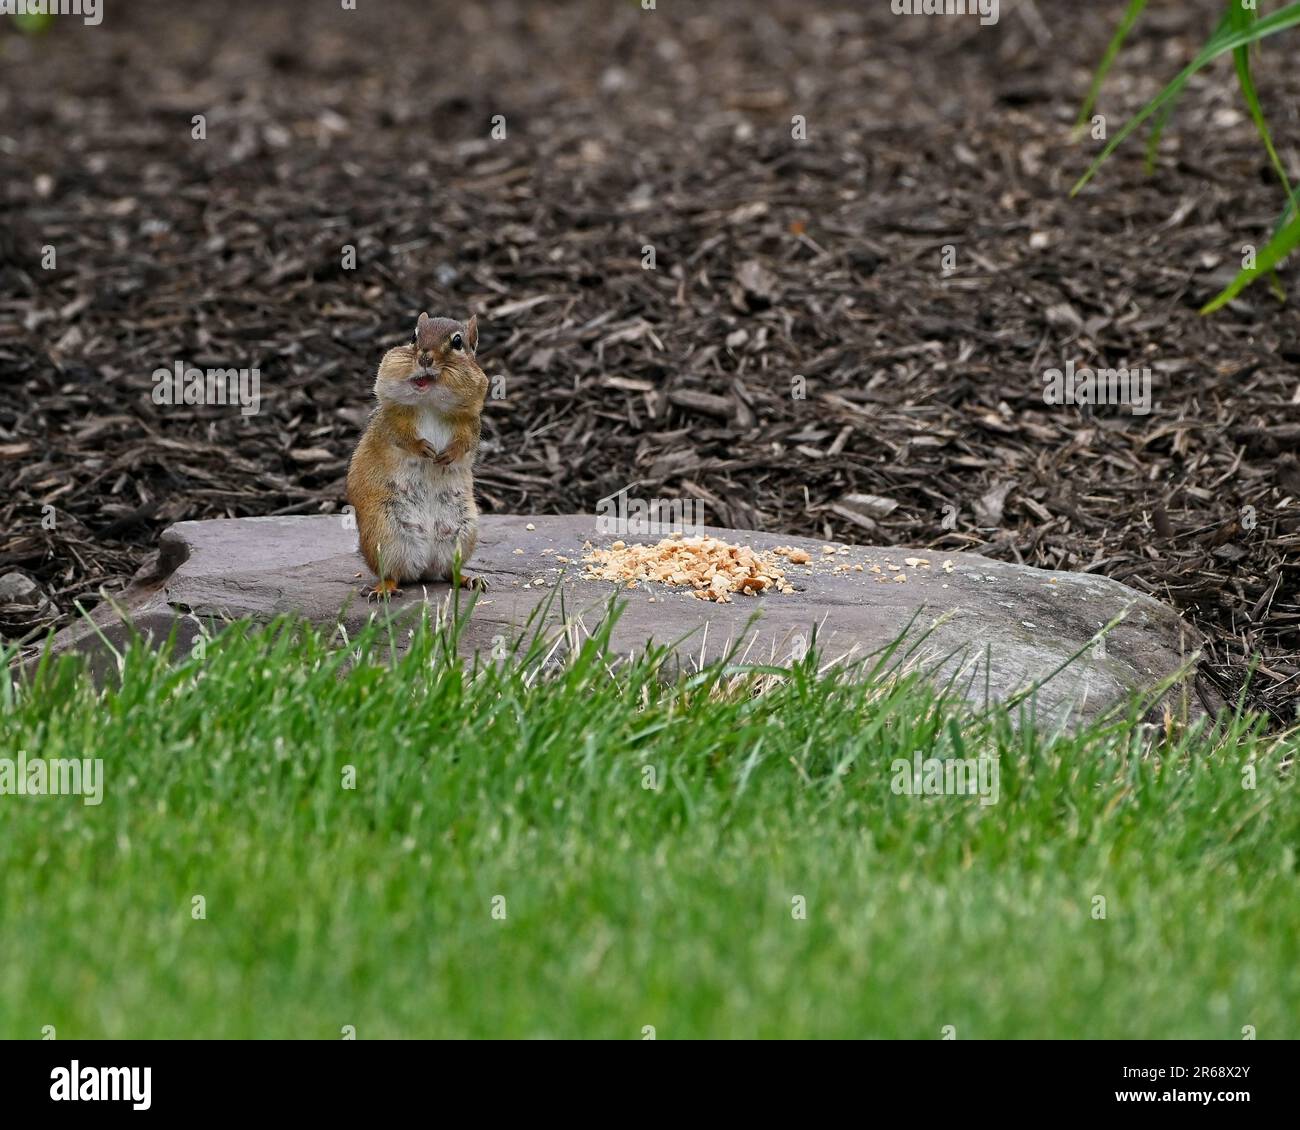 Chipmunk making funny faces while eating Stock Photo